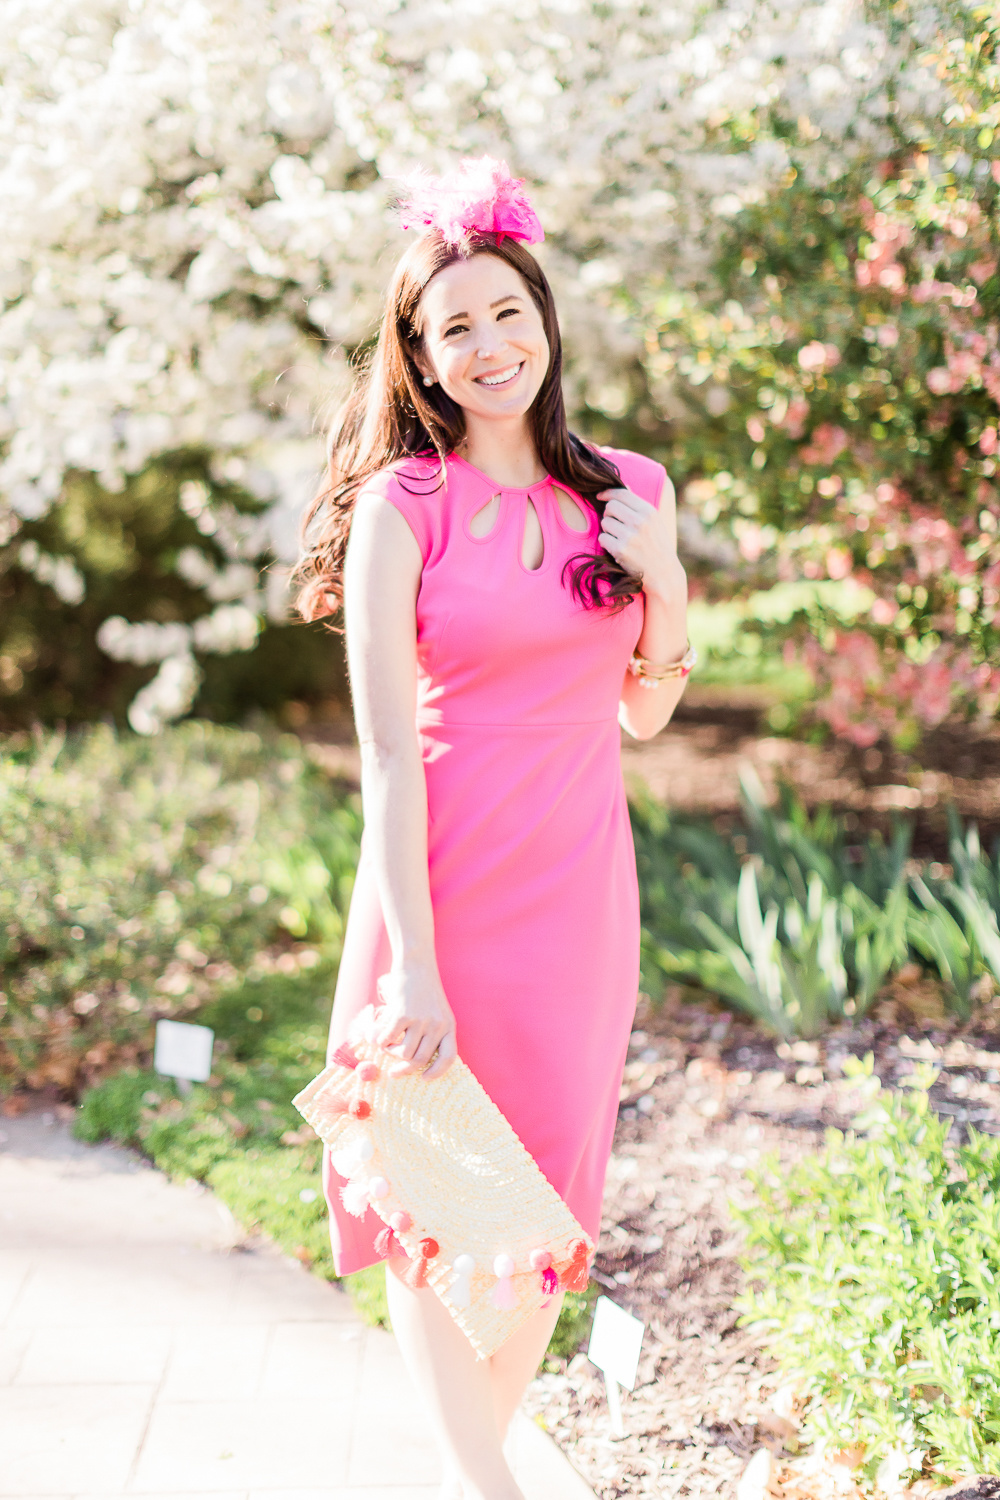 Maggy London Alyssa Midi Dress styled with a pink fascinator headband, straw pom pom and tassel clutch, and nude Steve Madden wedges, Derby Day Style Guide: 3 Head-to-Toe Kentucky Derby Outfit Ideas by affordable fashion blogger Stephanie Ziajka from Diary of a Debutante